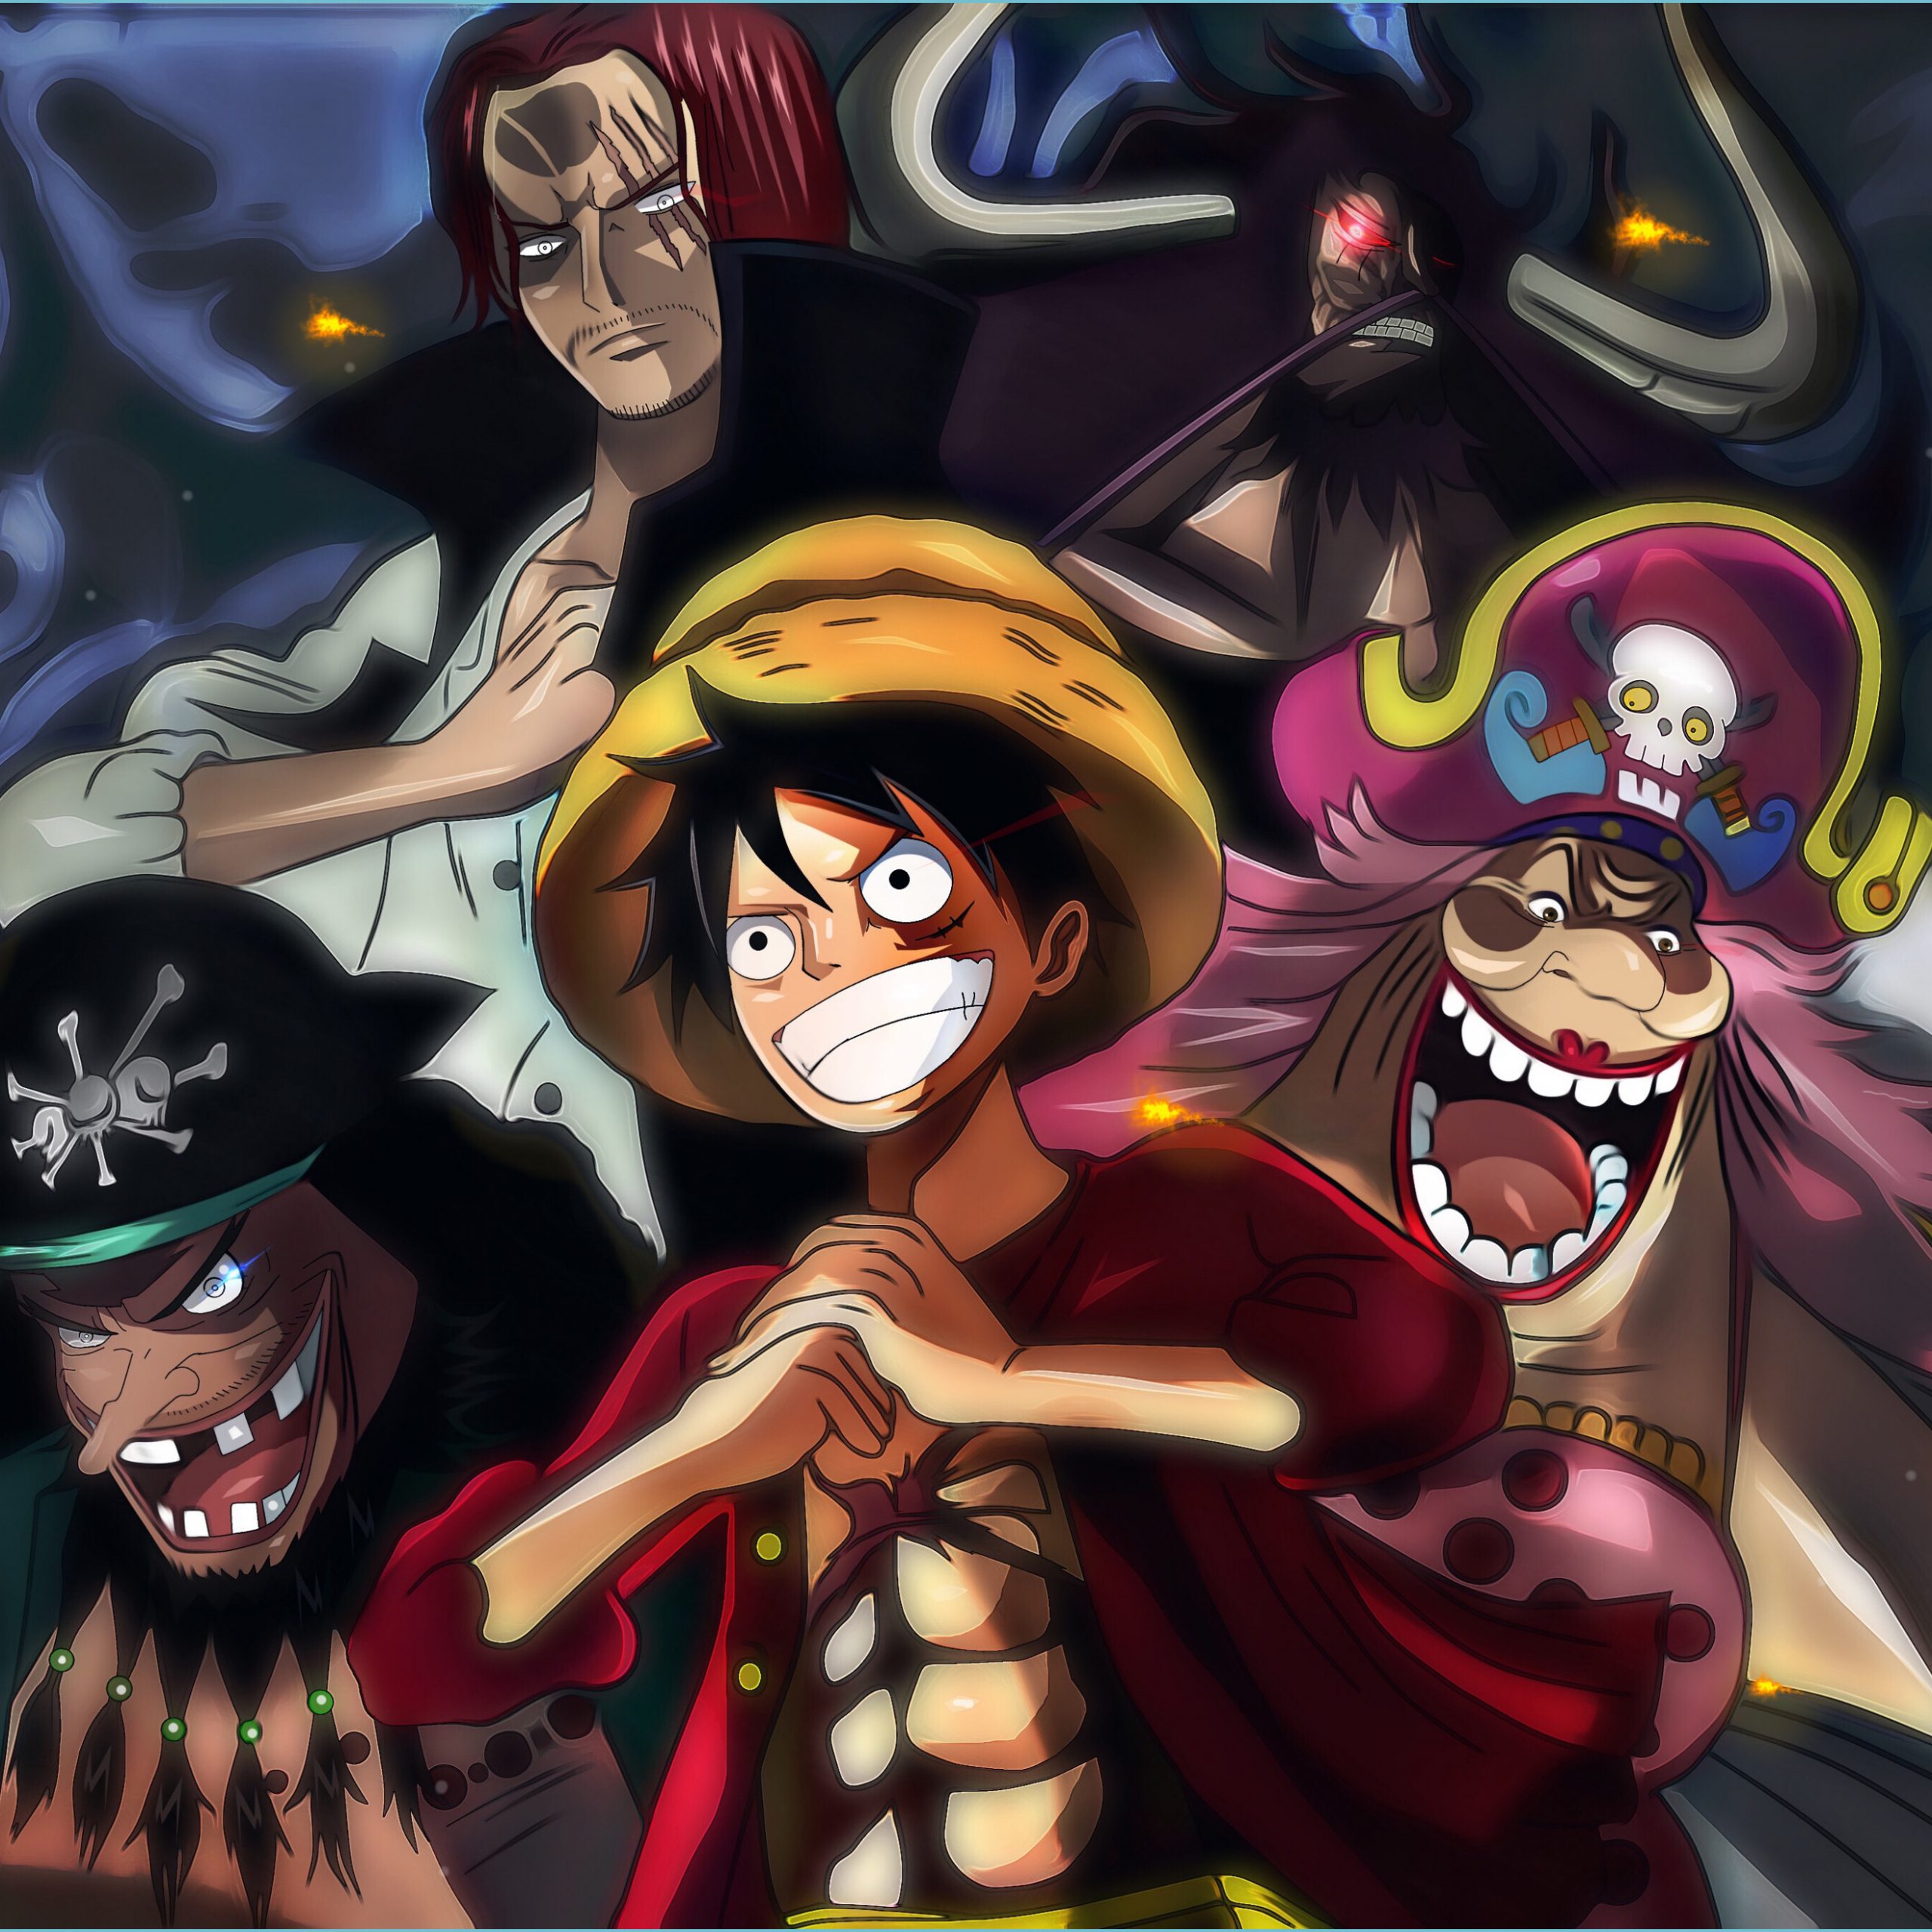 Wallpaper ID 453932  Anime One Piece Phone Wallpaper Shanks One Piece  720x1280 free download